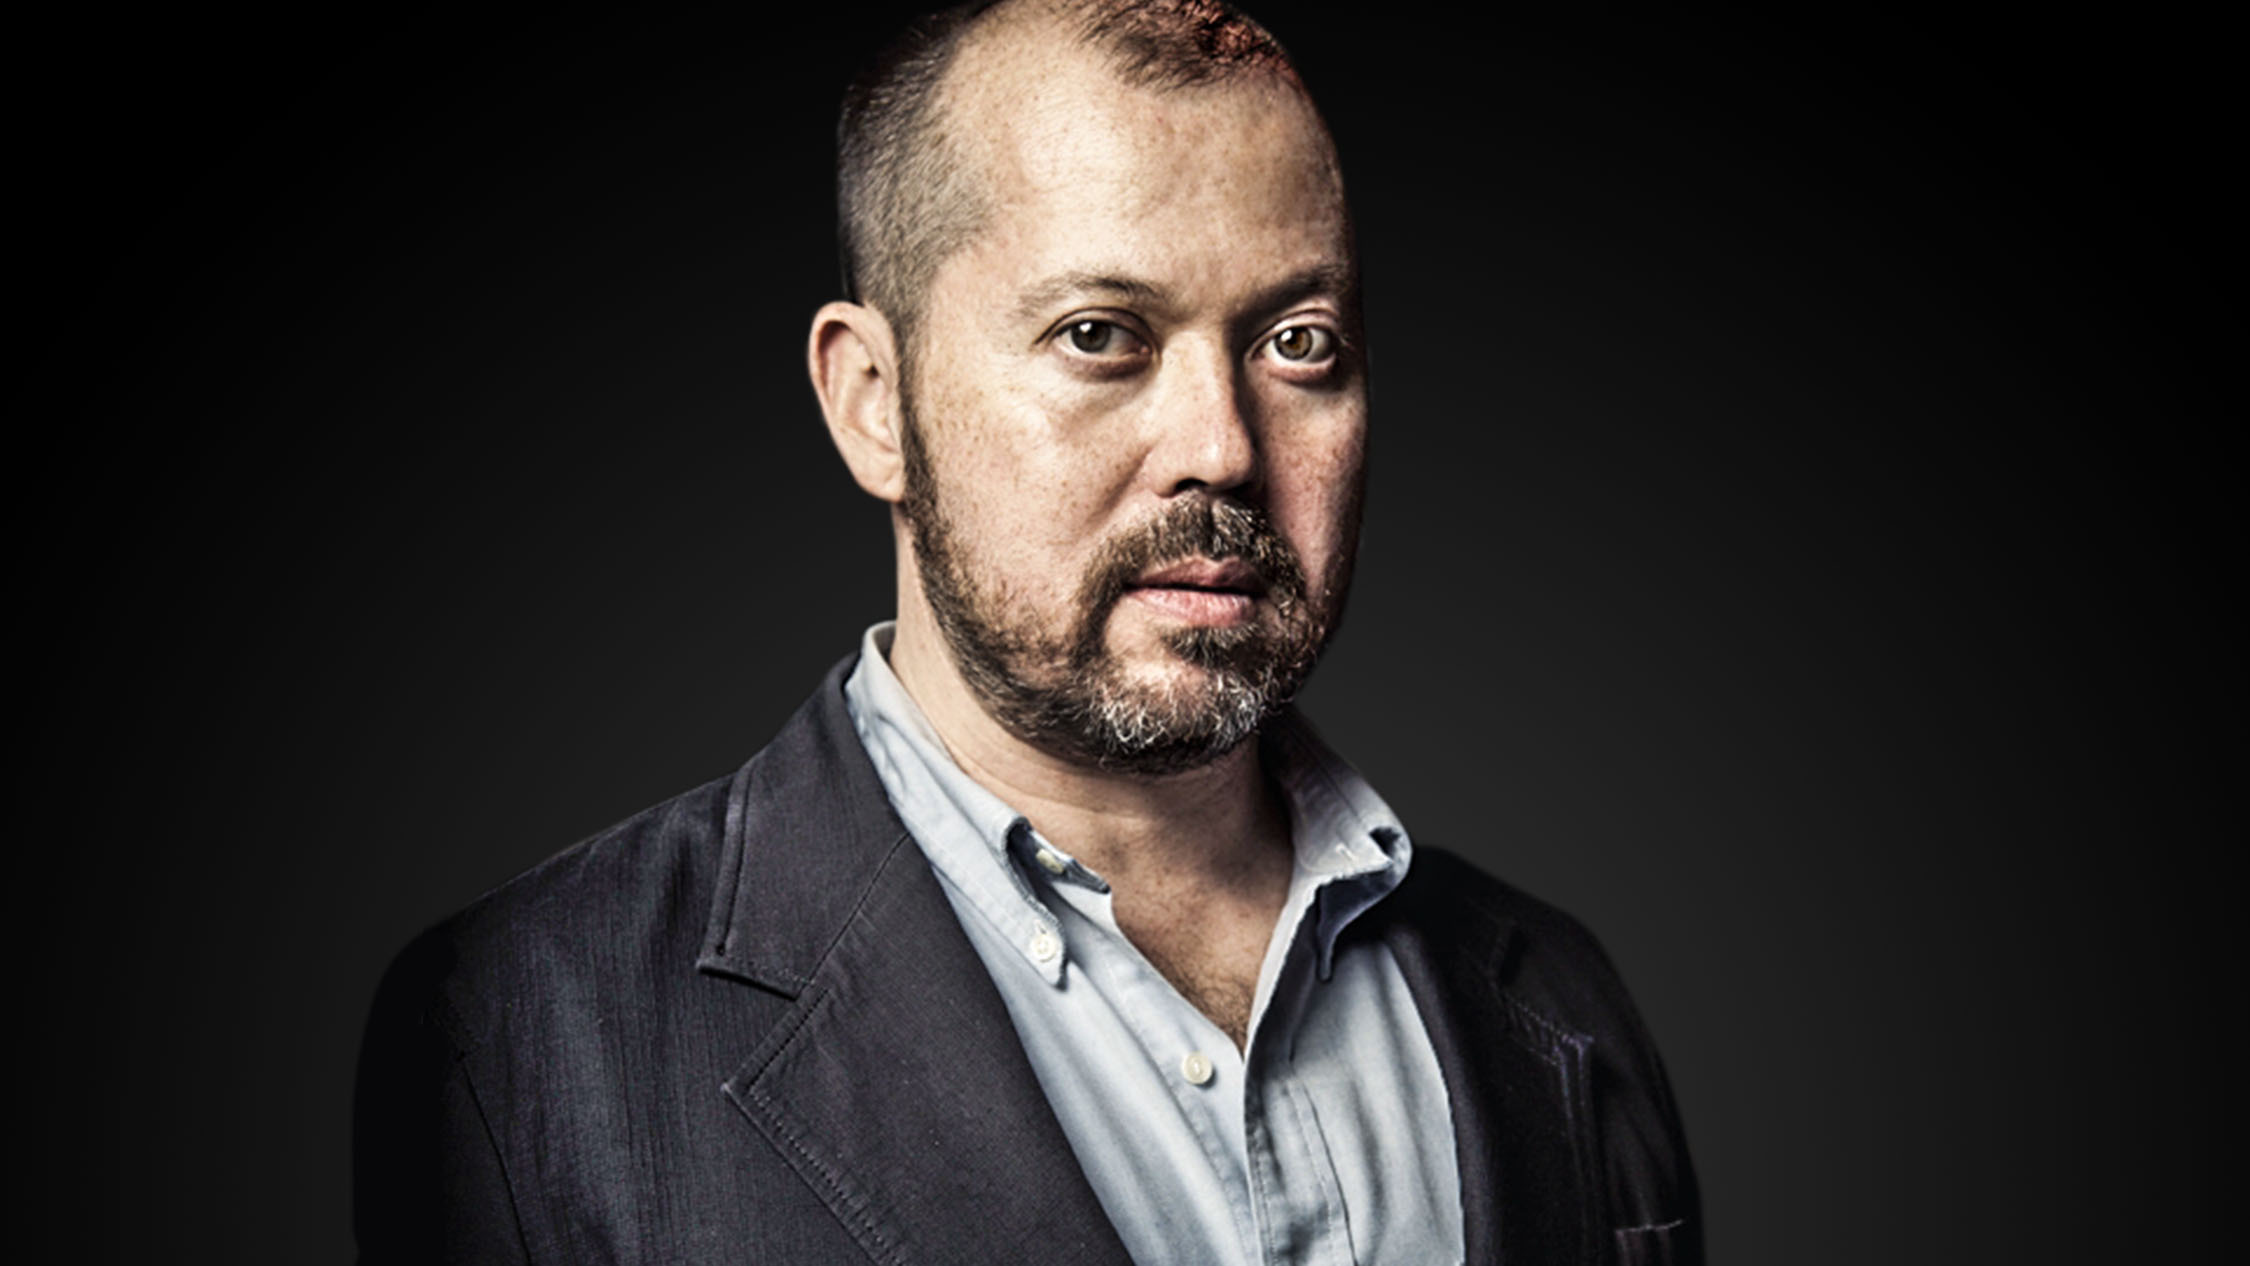 how to write an autobiography alexander chee